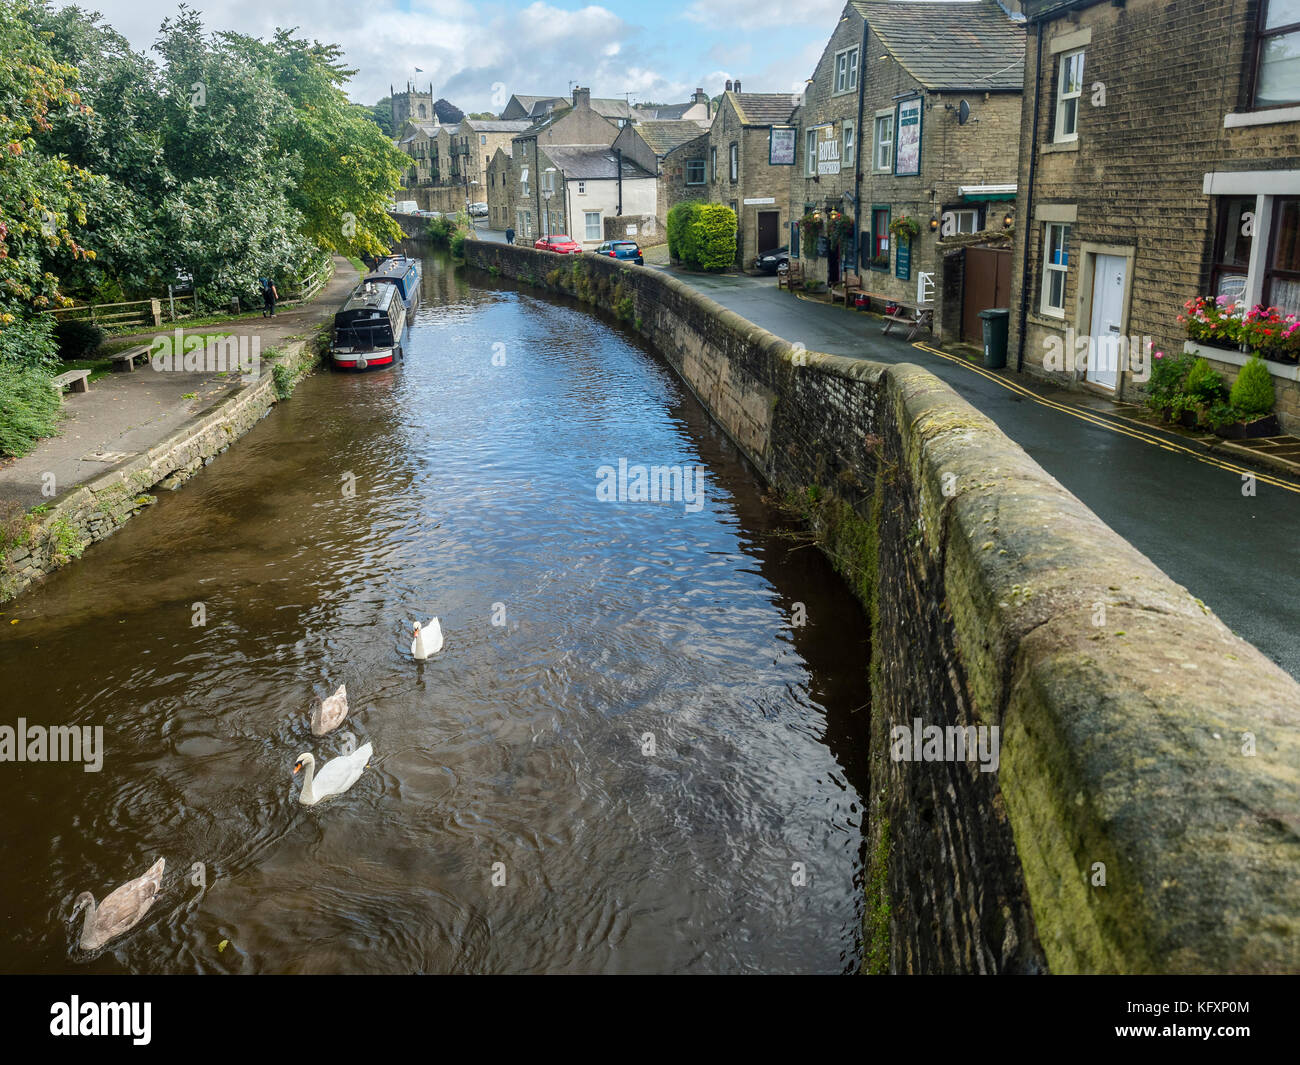 Skipton, Water Canal Leeds Liverpool, Destrict Yorkshire Dales, England, Great Britain Stock Photo